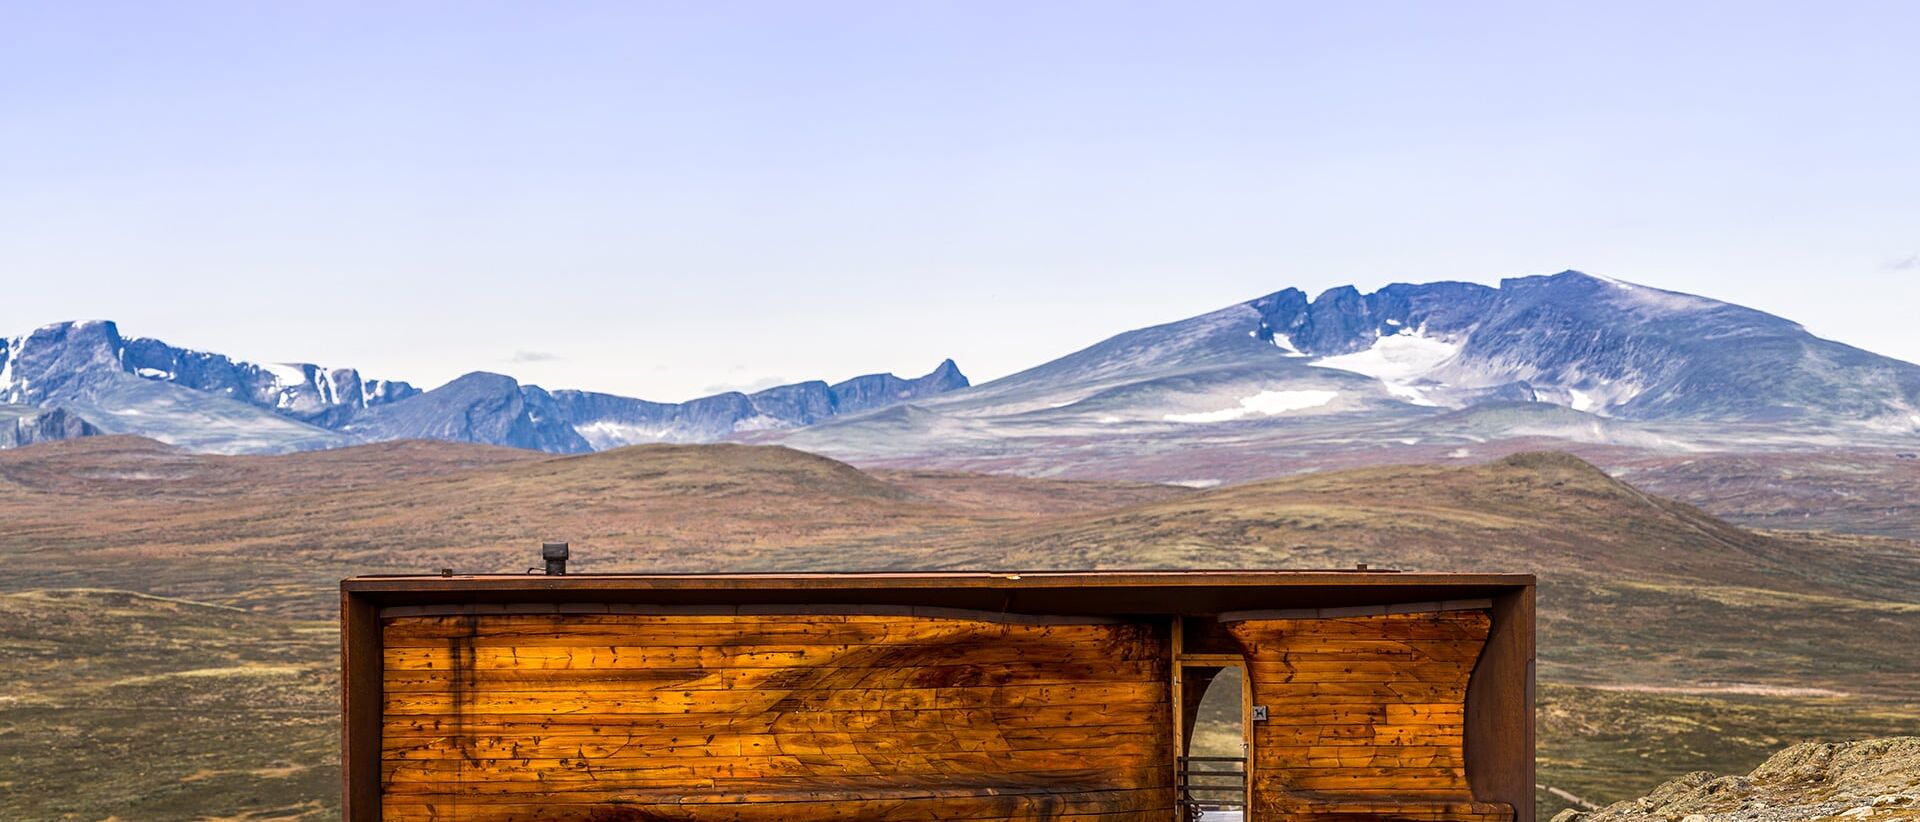 Wild Reindeer Pavilion. A wooden building in front of snow covered mountain Snøhetta on Dovrefjell.